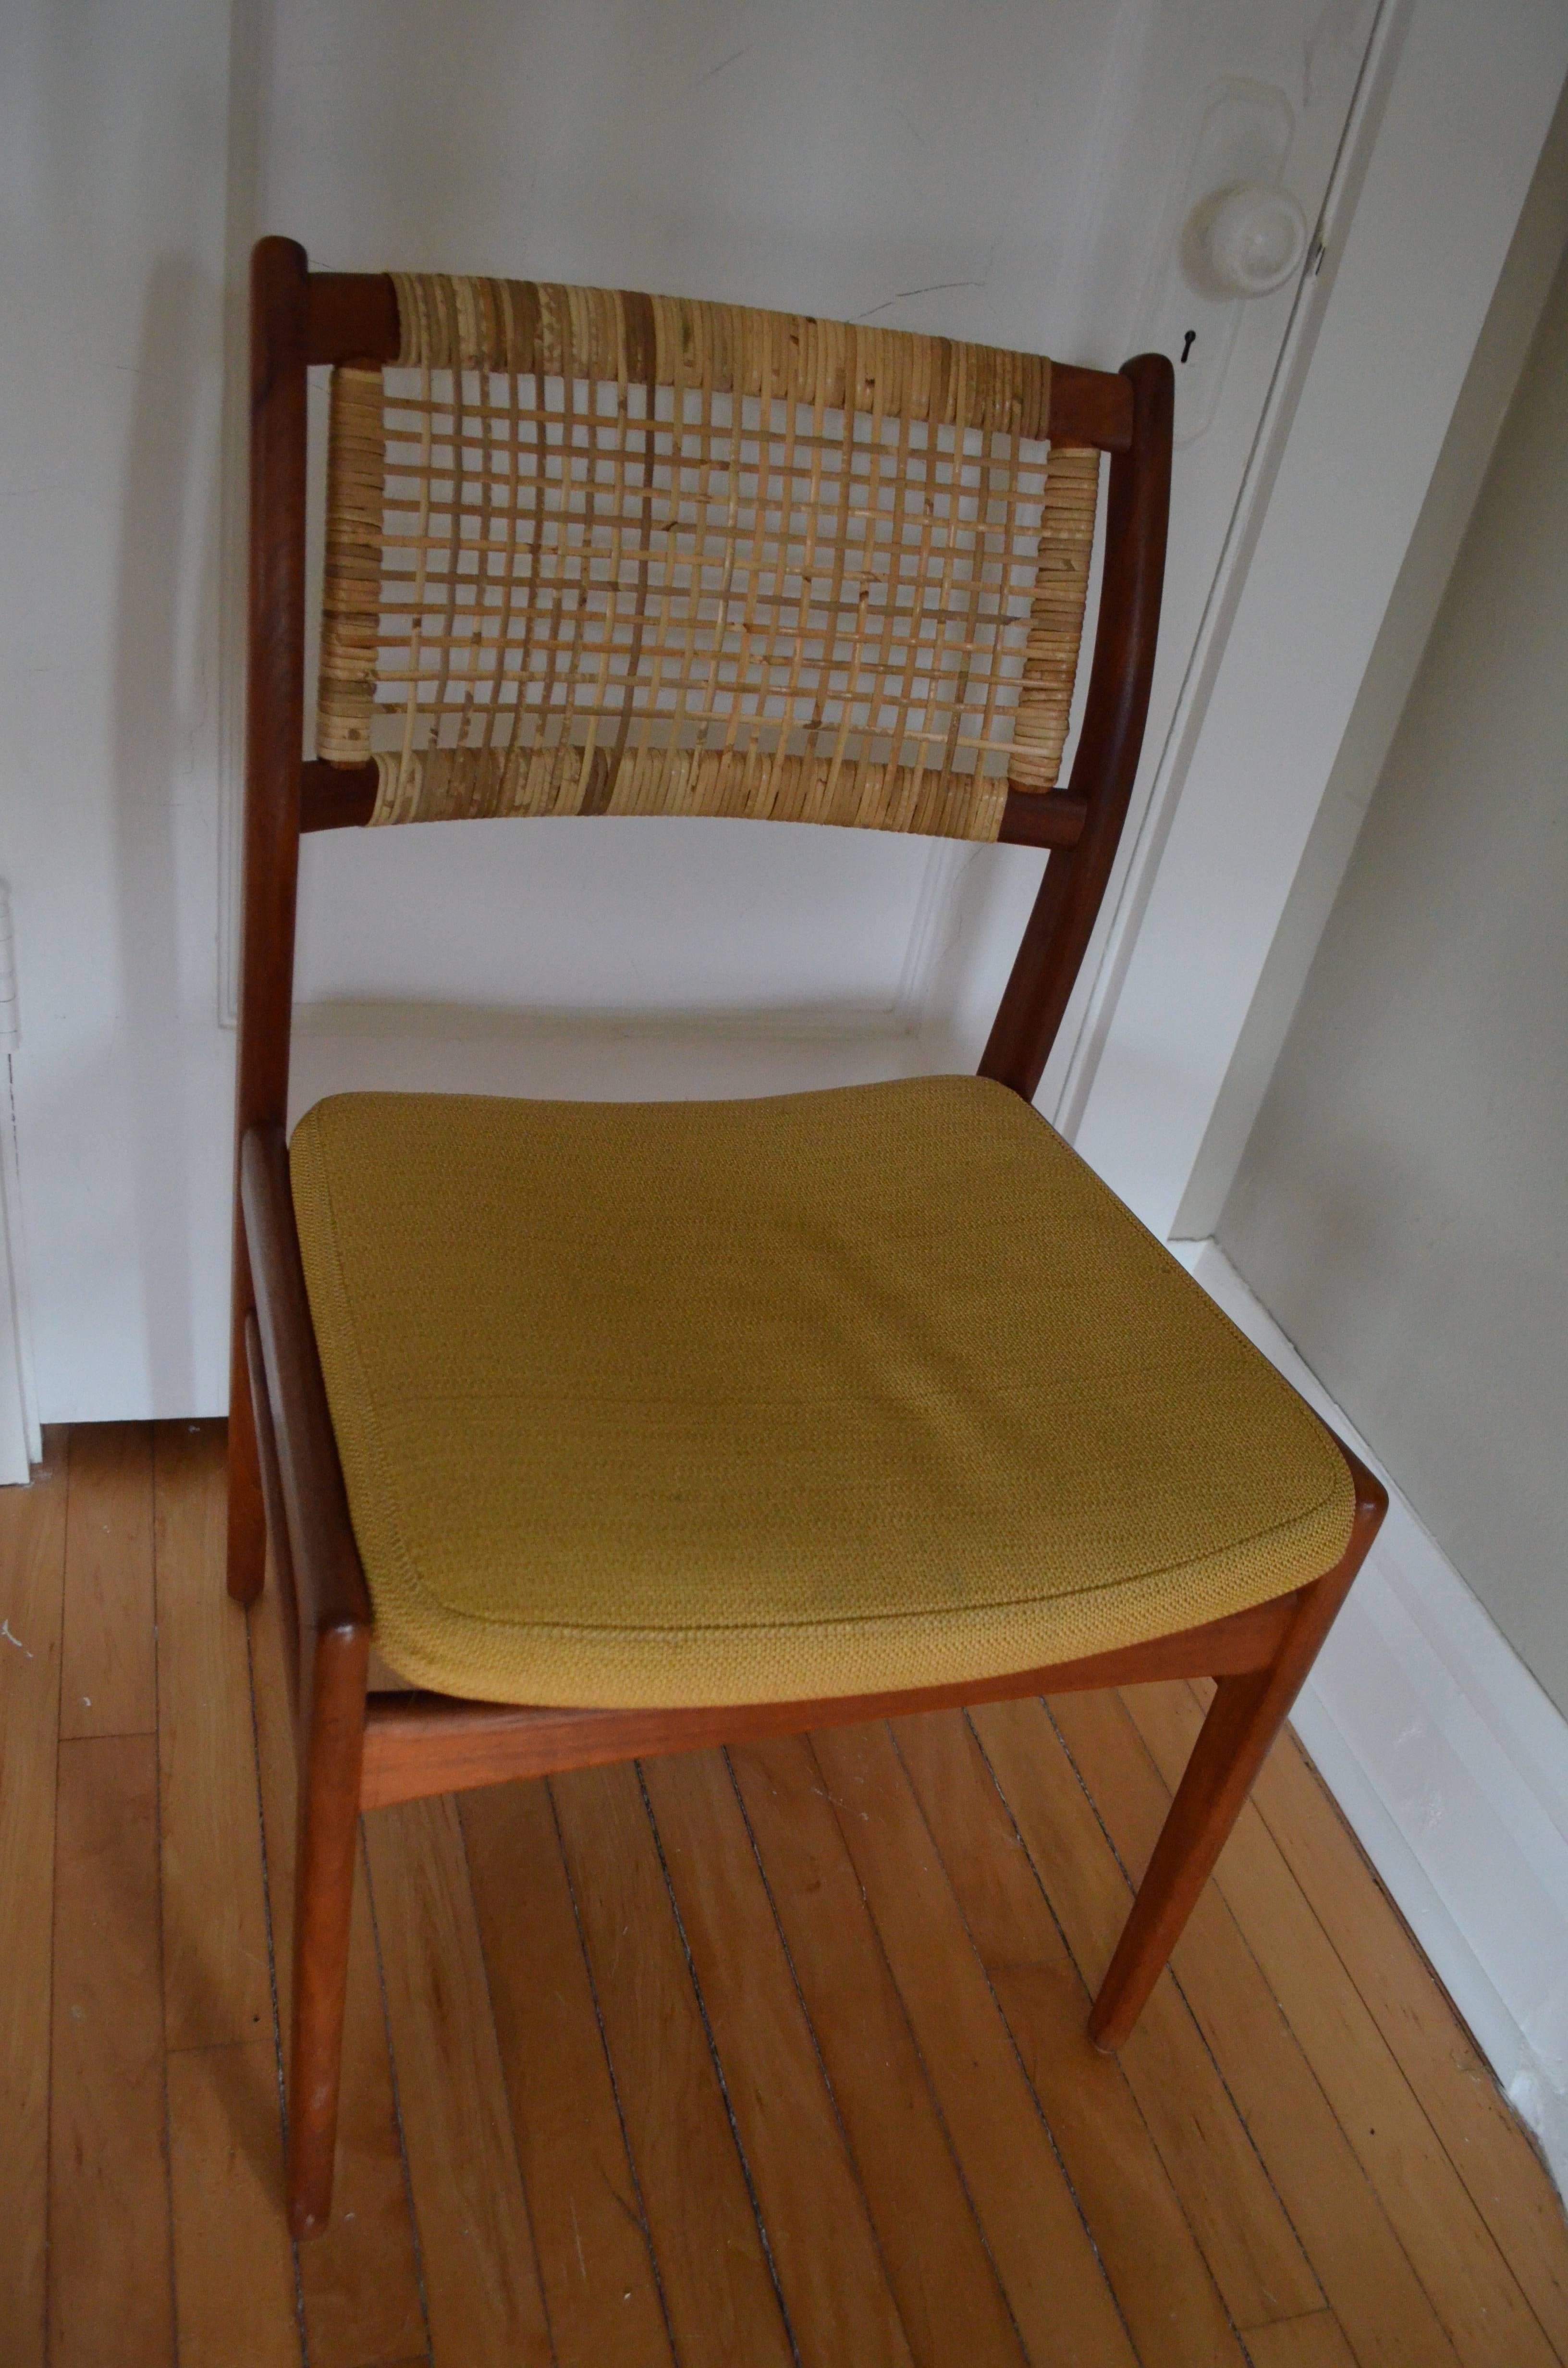 Midcentury dining room chairs from DUX of Sweden, designed by Sylve Stenquist. Set of eight. Professionally re-caned. Teak frames are in excellent shape. Will professionally reupholster to your specs with fabric provided or chosen through our